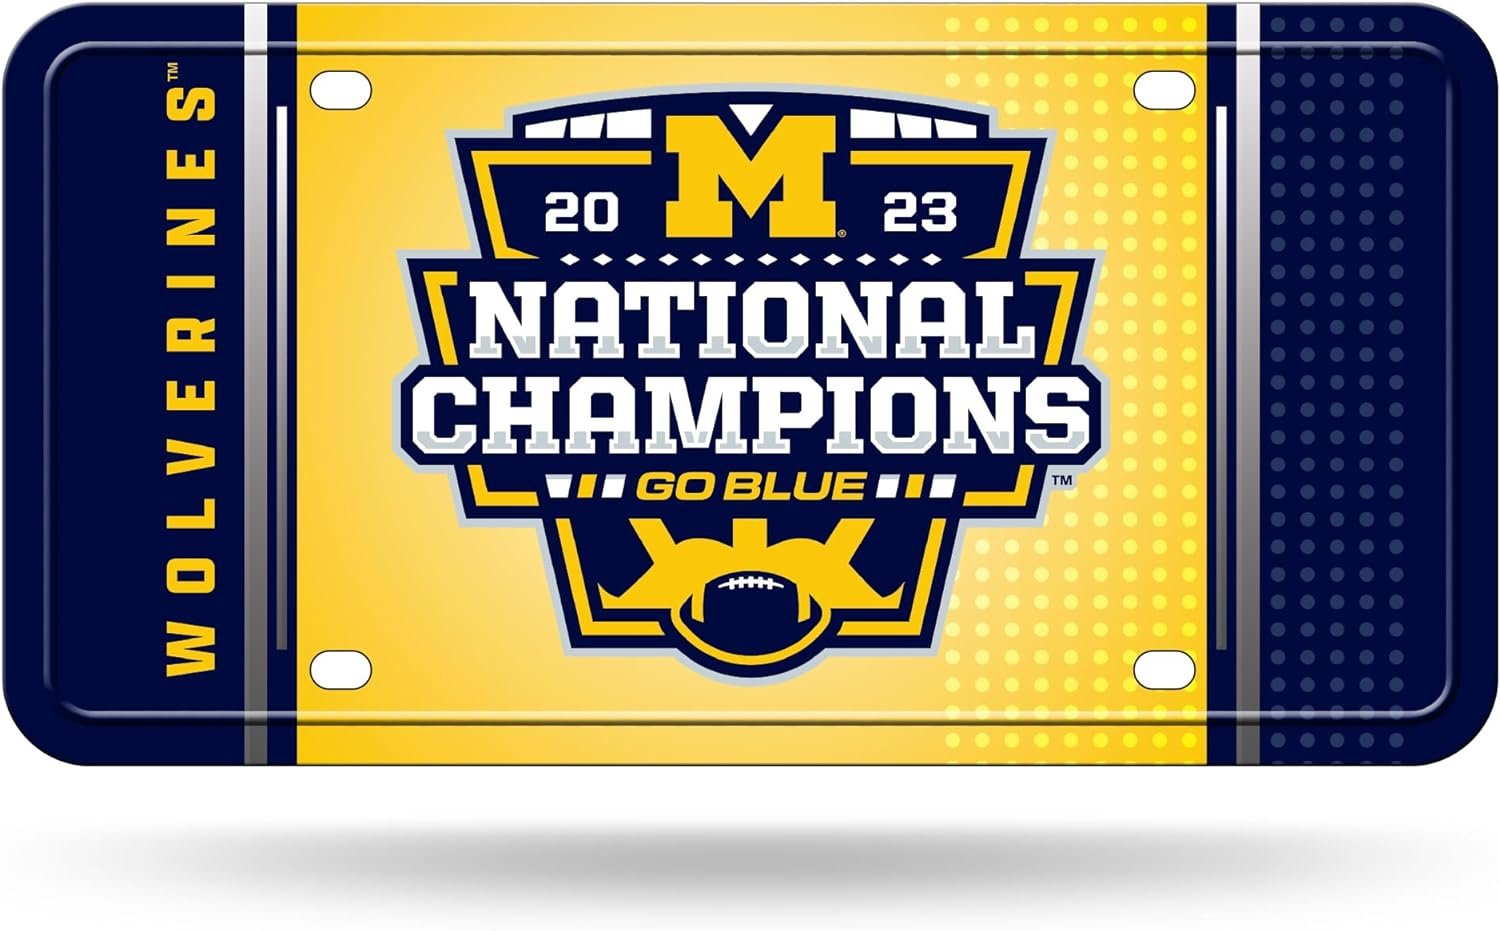 University of Michigan Wolverines 2024 Champions Metal Auto Tag License Plate, 12x6 Inch, Novlety, Great for Auto, Home or Office